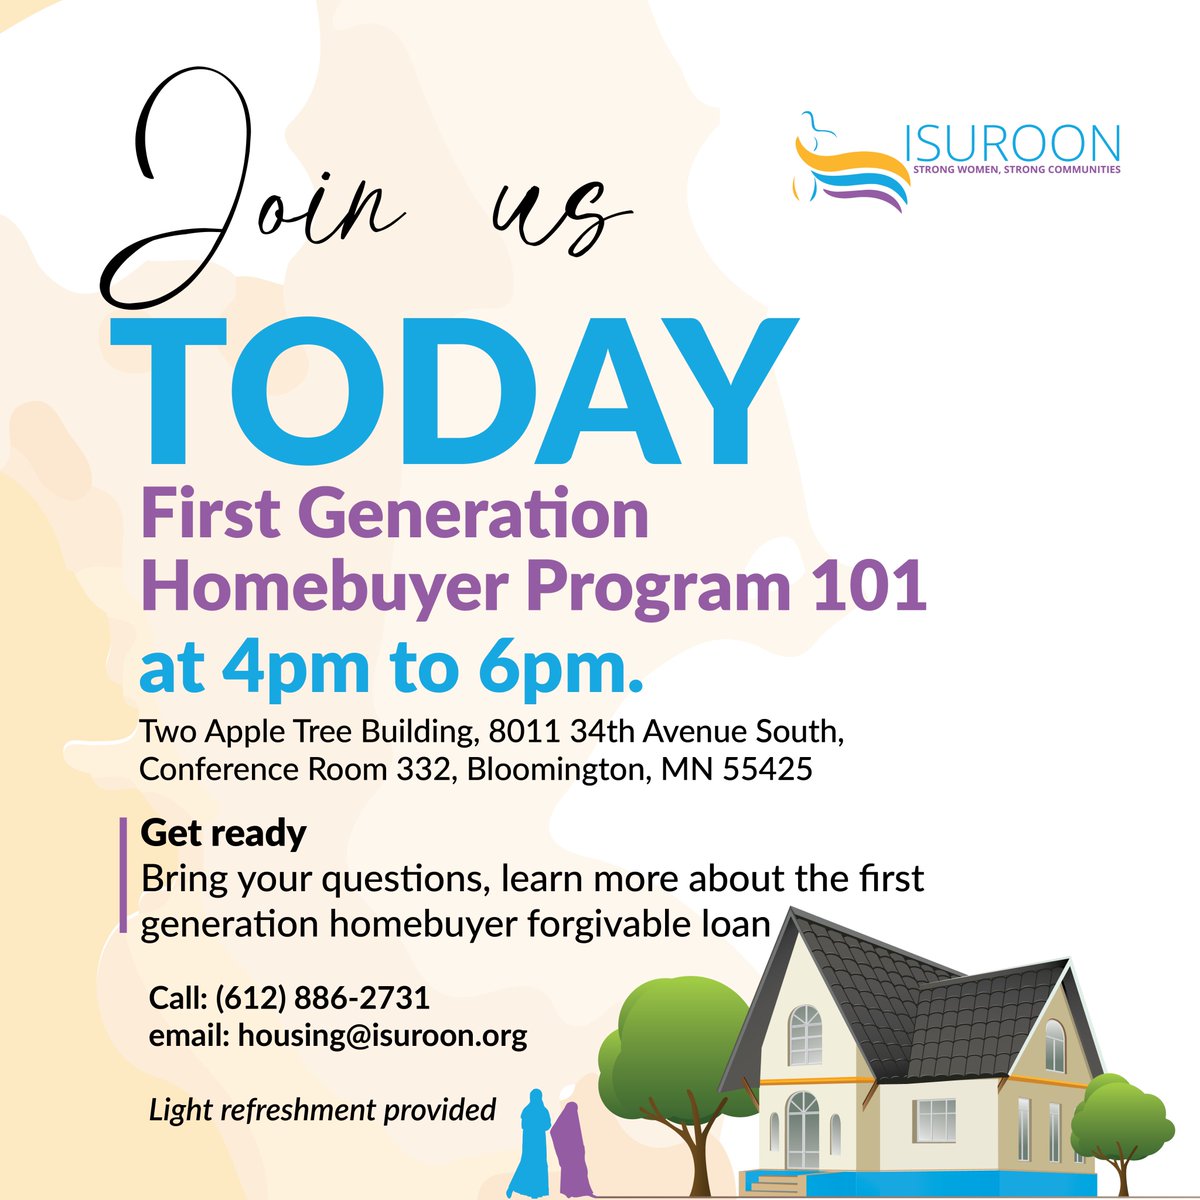 Join us today! Bring your questions! learn more about the first-generation homebuyer forgivable loan! From 4-6PM at the Two Apple Tree Building, 8011 34th Ave s, Bloomington, MN 55425 in the conference room 332 #FirstGeneration #Homebuyer